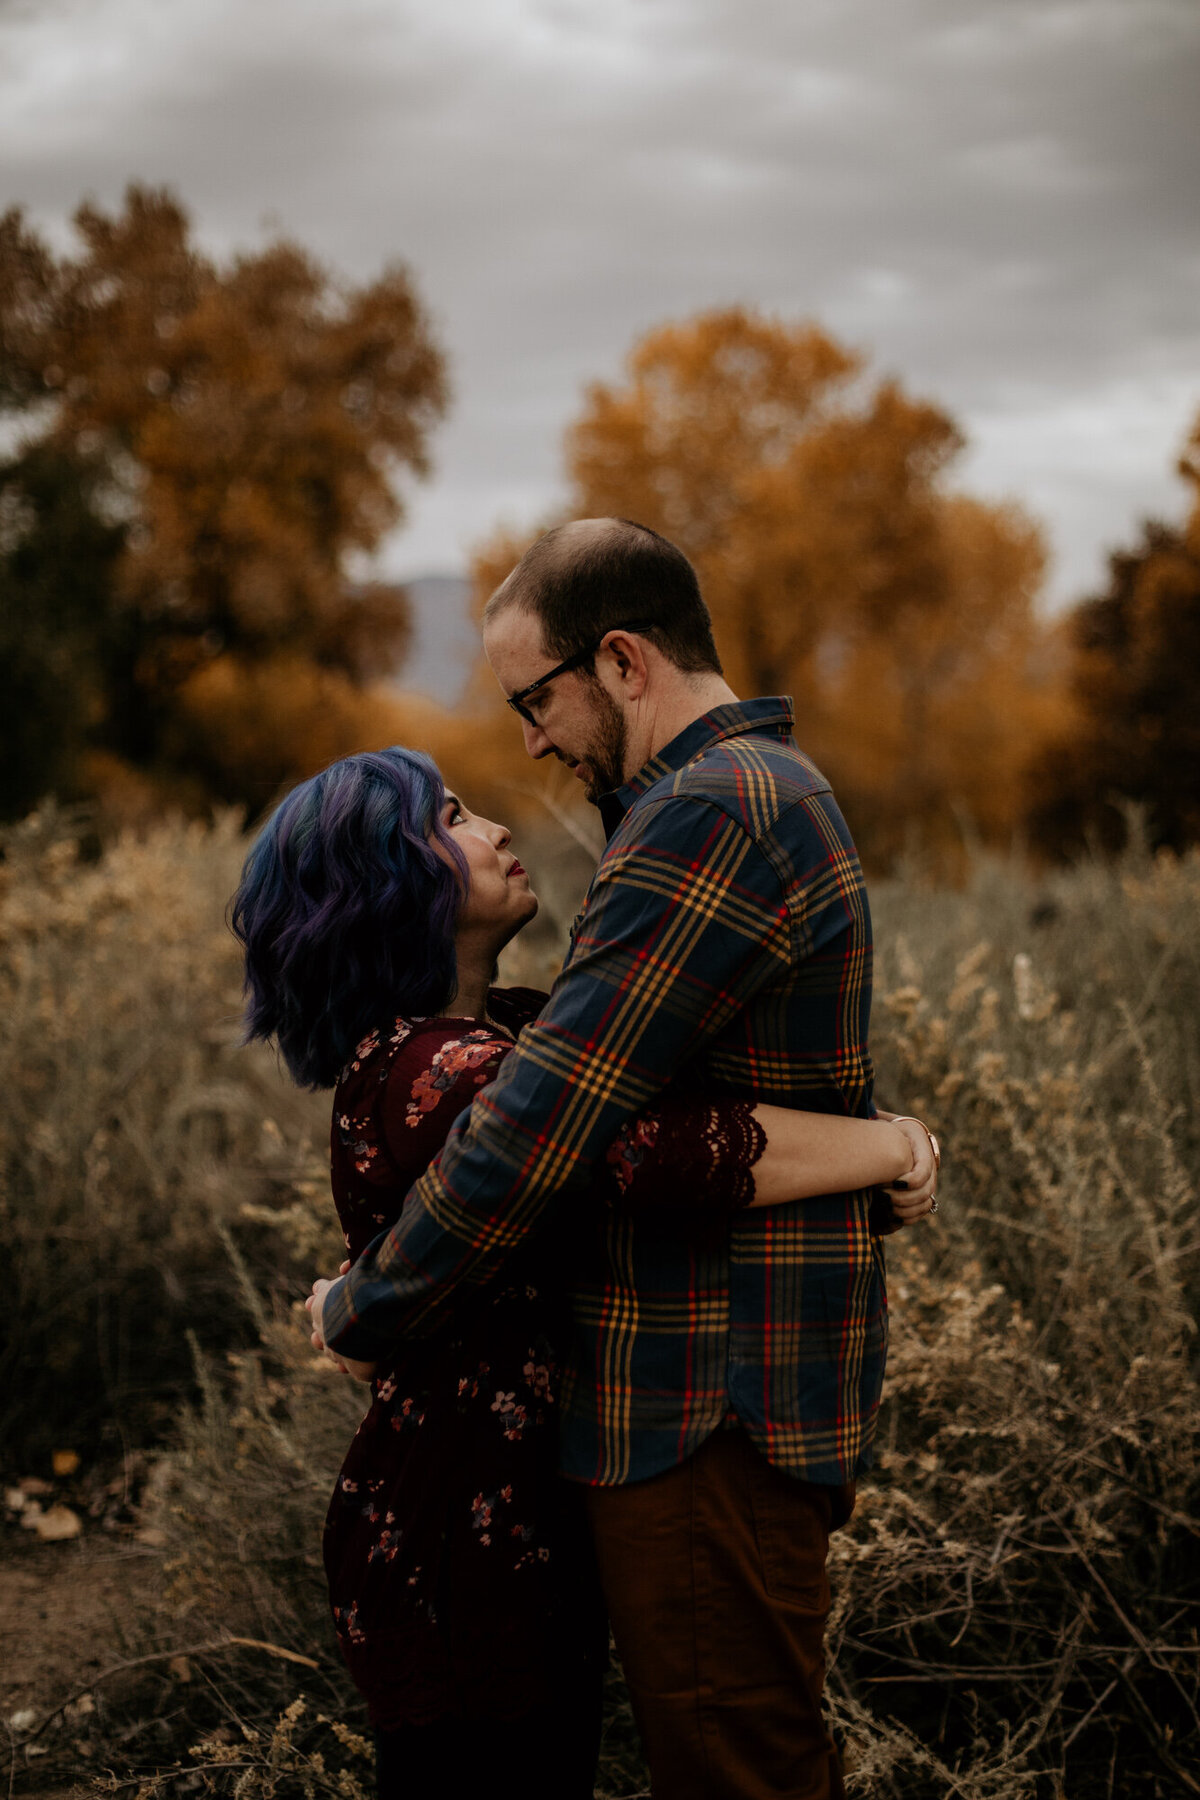 blue haired woman hugging man in front of fall trees